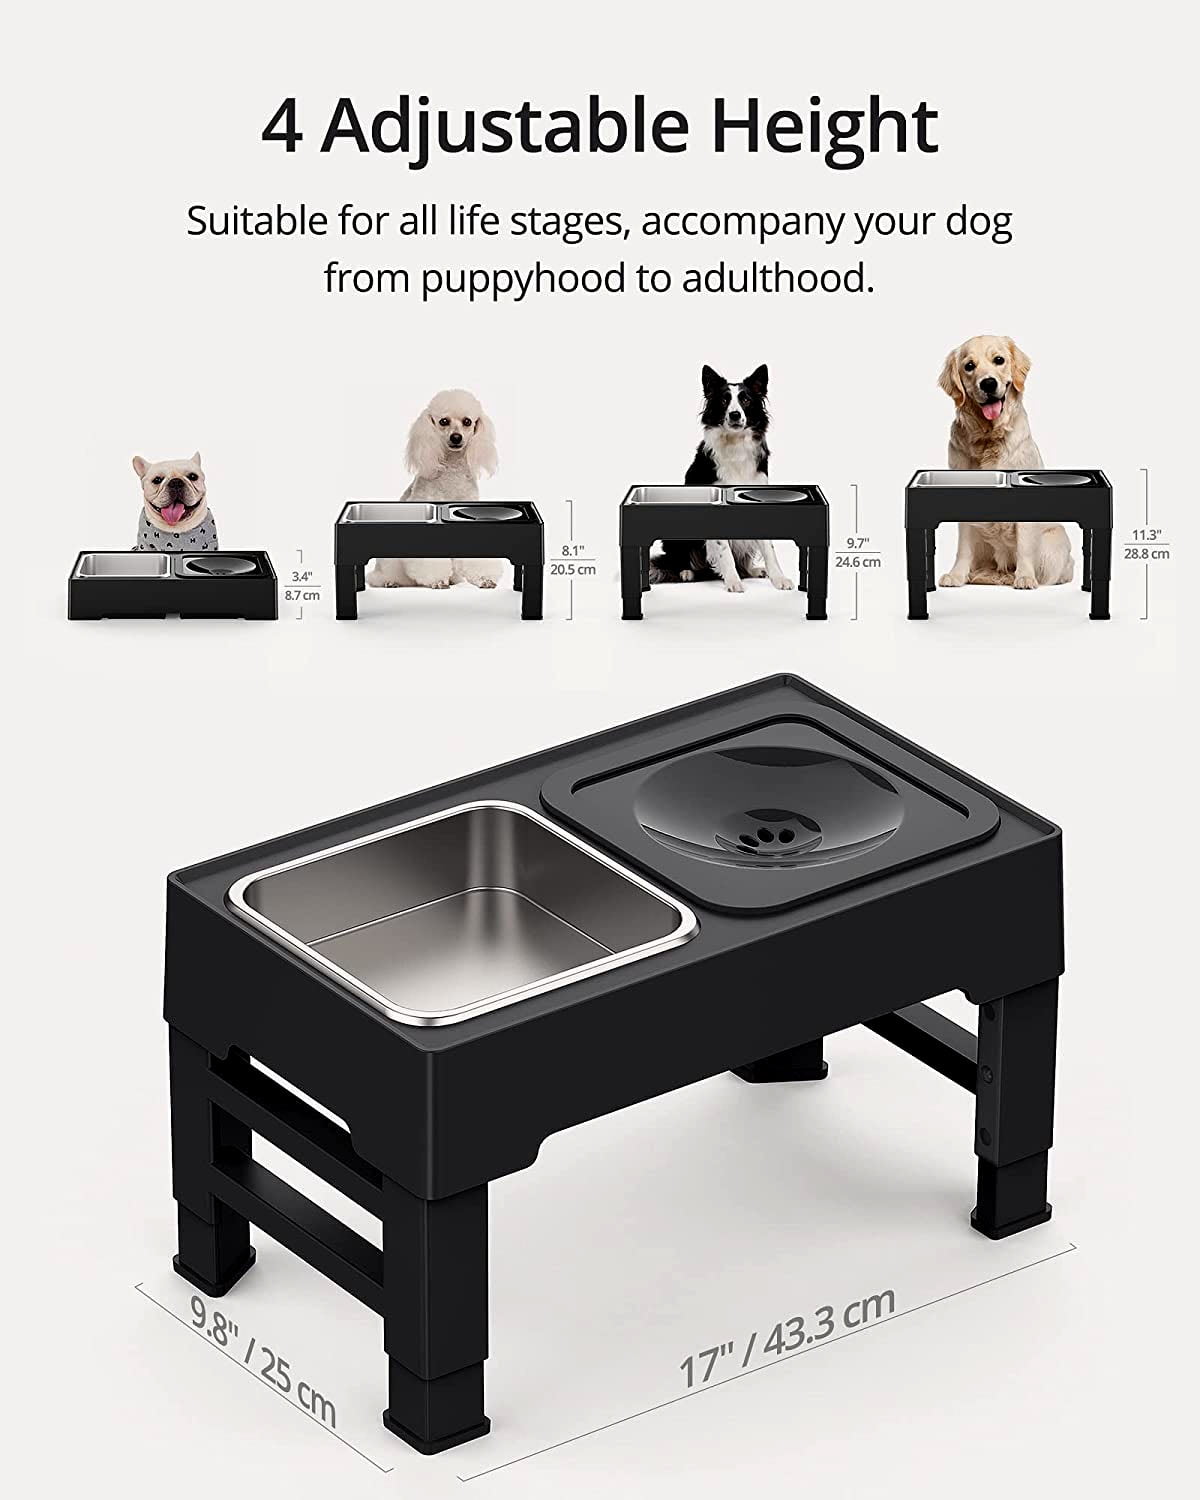 PROERR Single Dog Bowl Stand,Tall Dog Food Stand Adjustable Wide 7-11  Heights 14.5,Metal Elevated Dog Bowl Holder Raised Water Feeder for